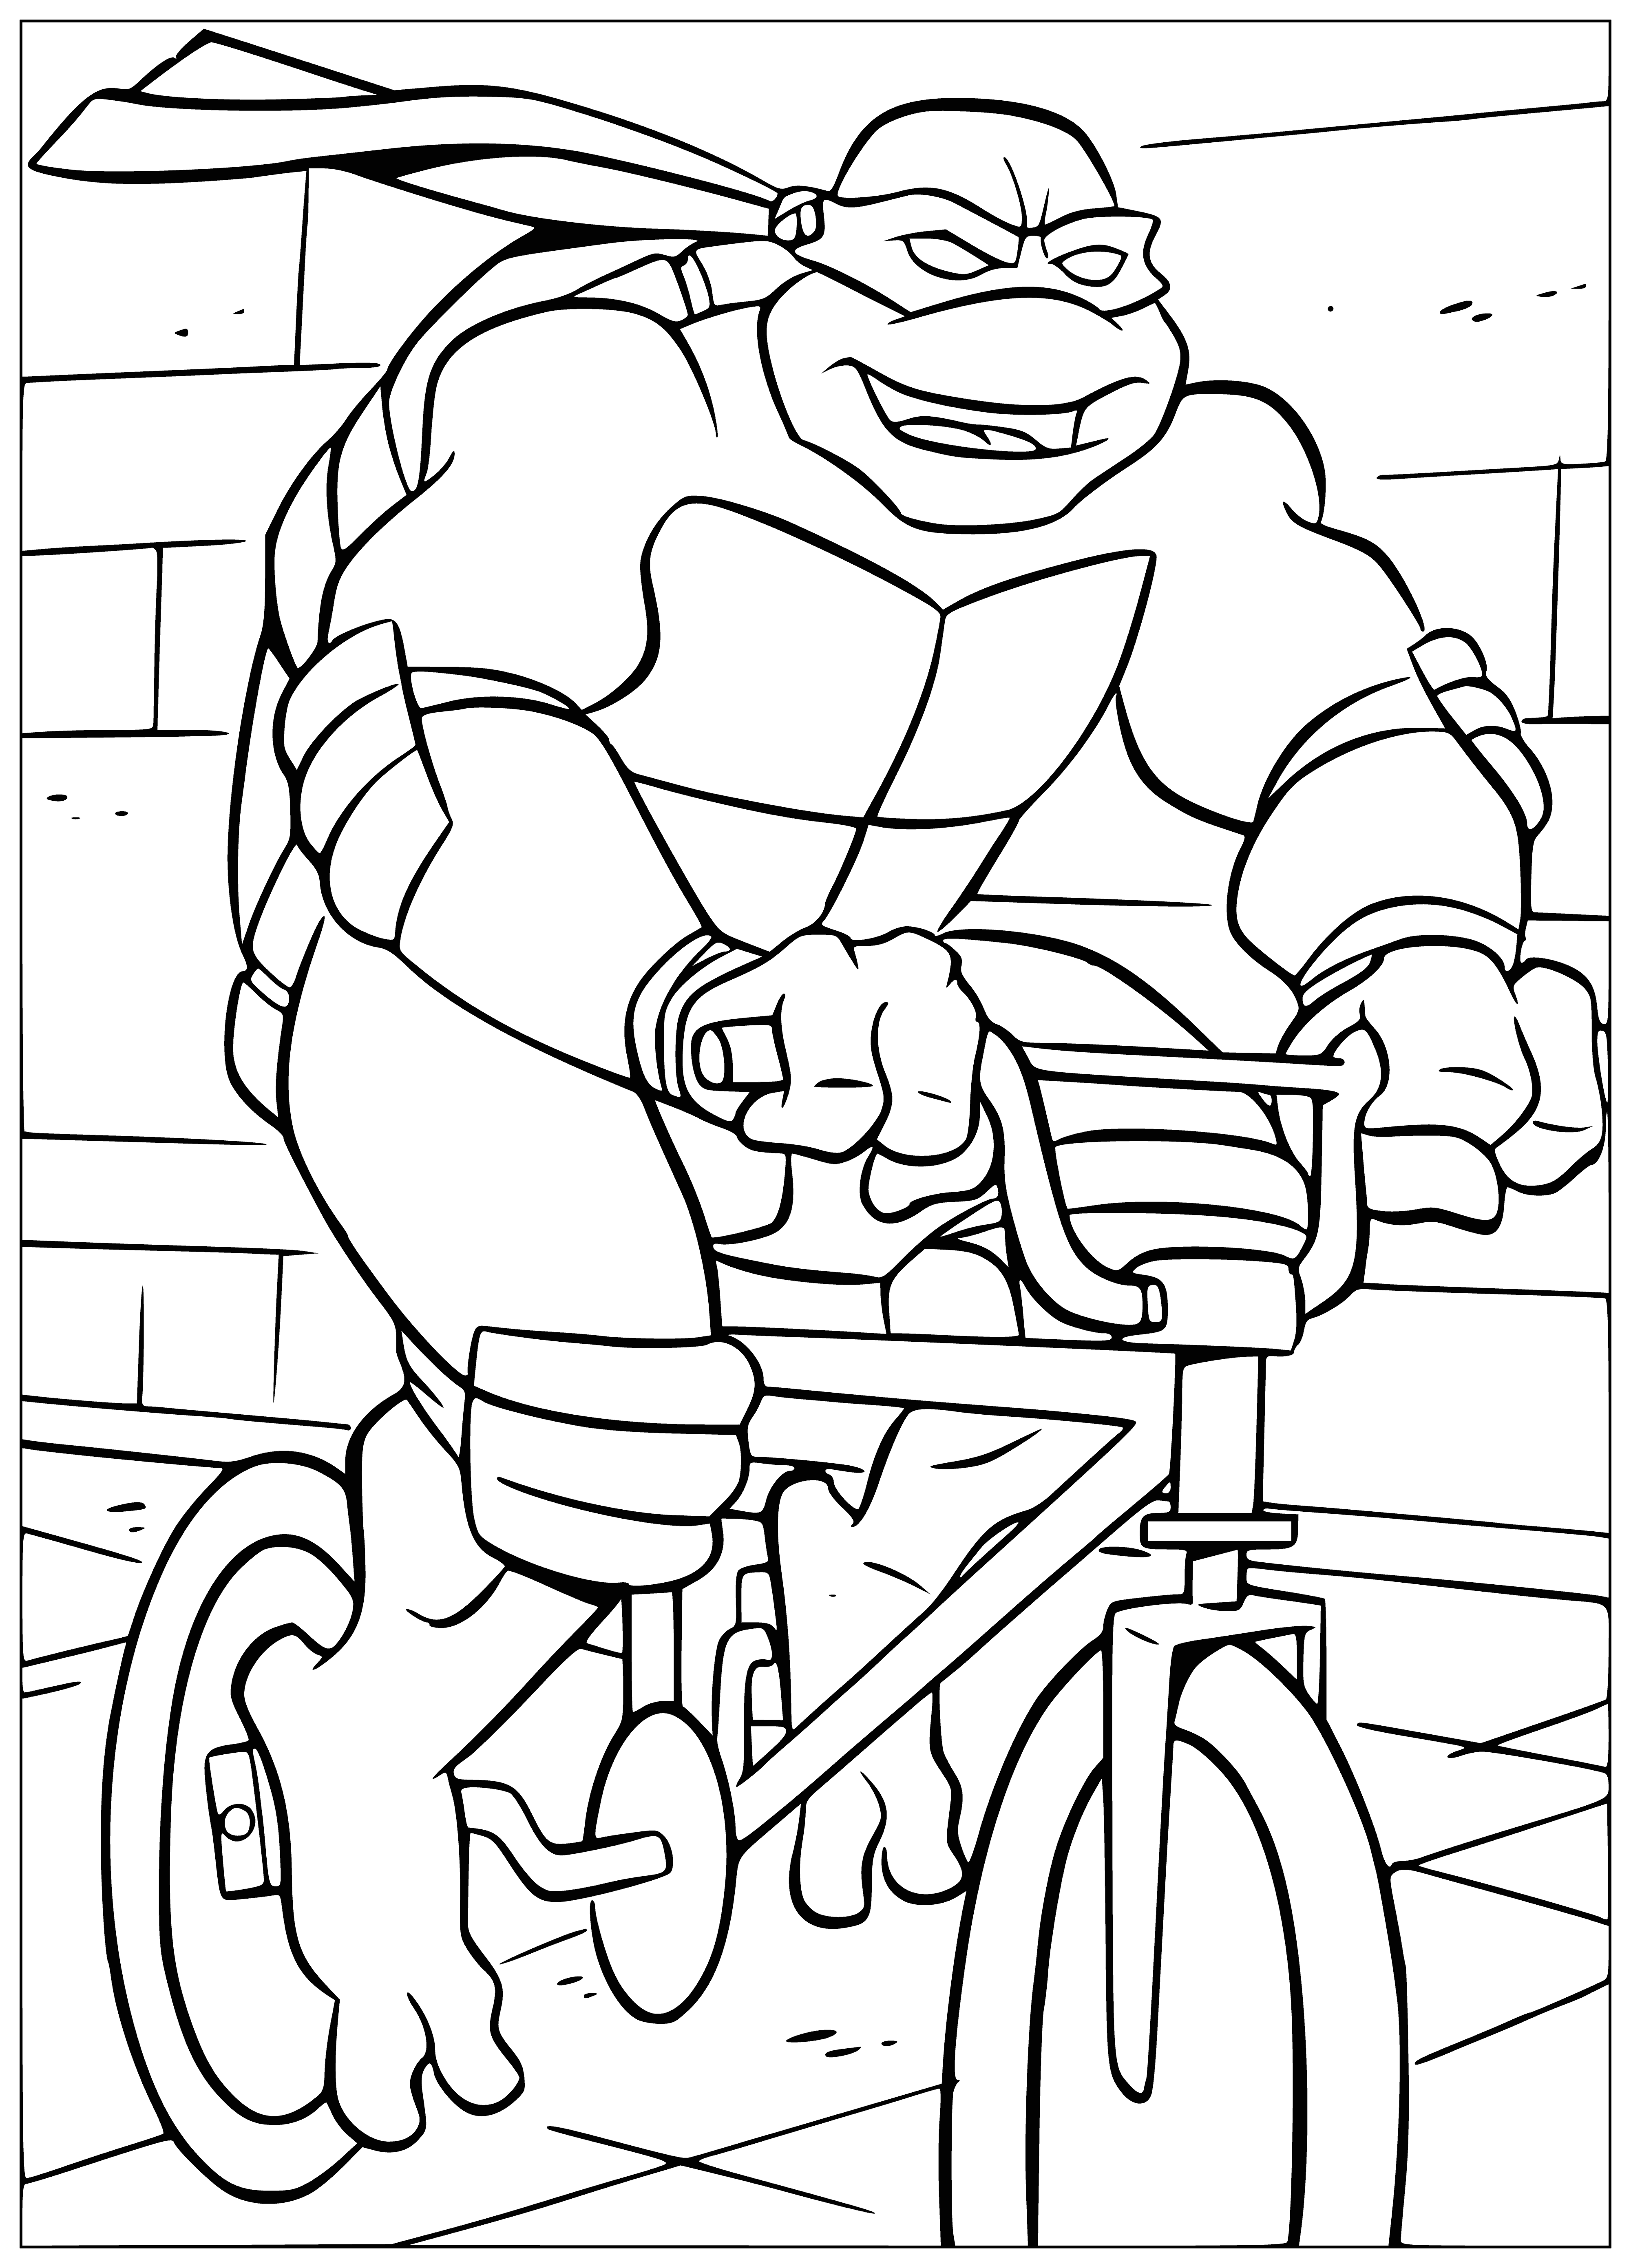 coloring page: Four ninja turtles riding bikes, armed with masks, sword, nunchuck, stick, & staff: an epic ride to save the world!